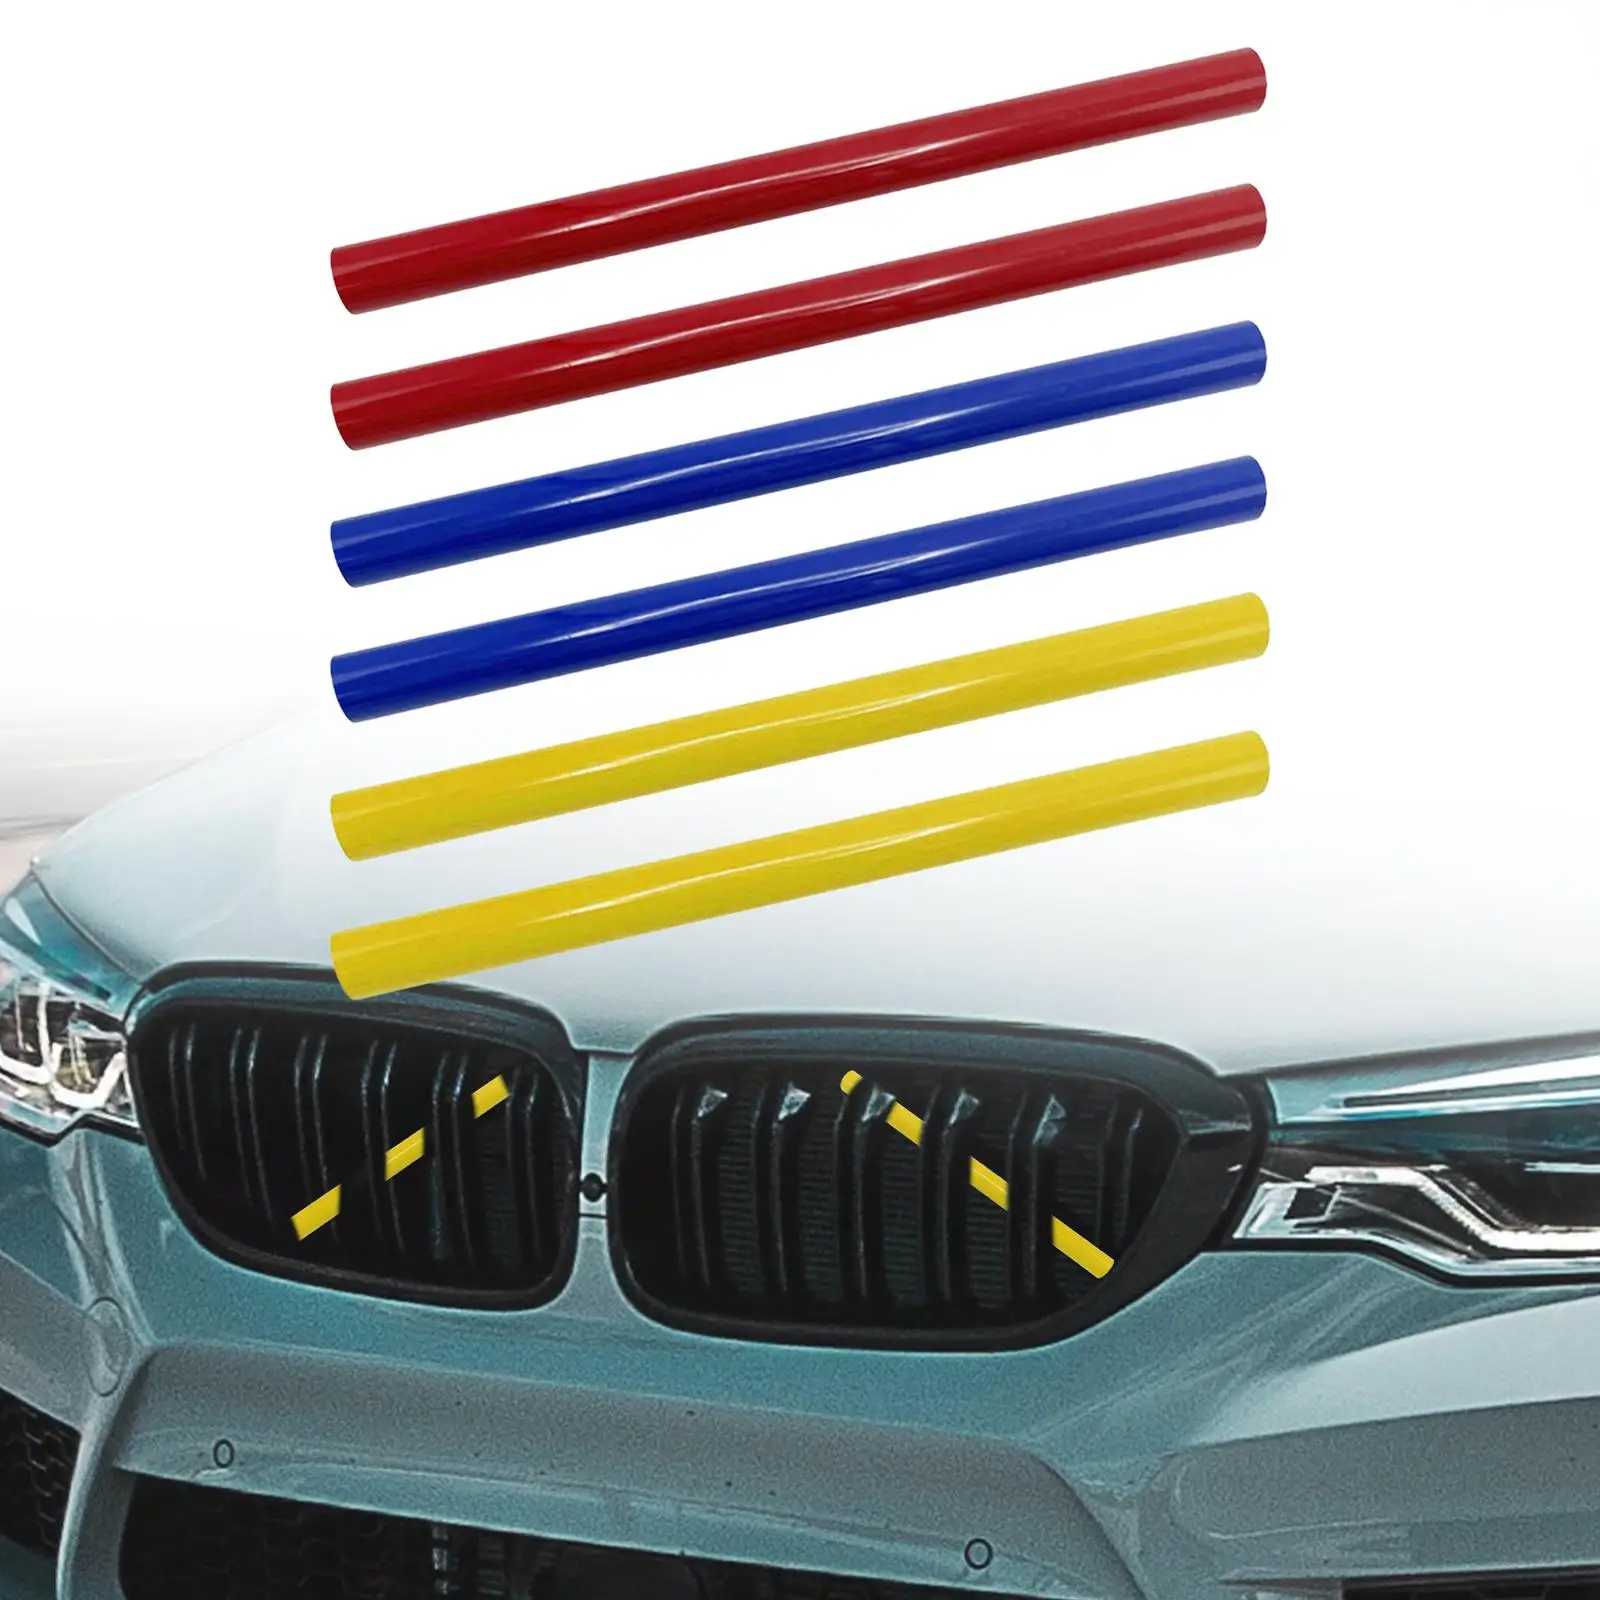 2Pcs Grille Insert Trims Car Decorations Replacement V Brace Wrap Covers for BMW 1 Series 116i 125i 120i Auto Accessories